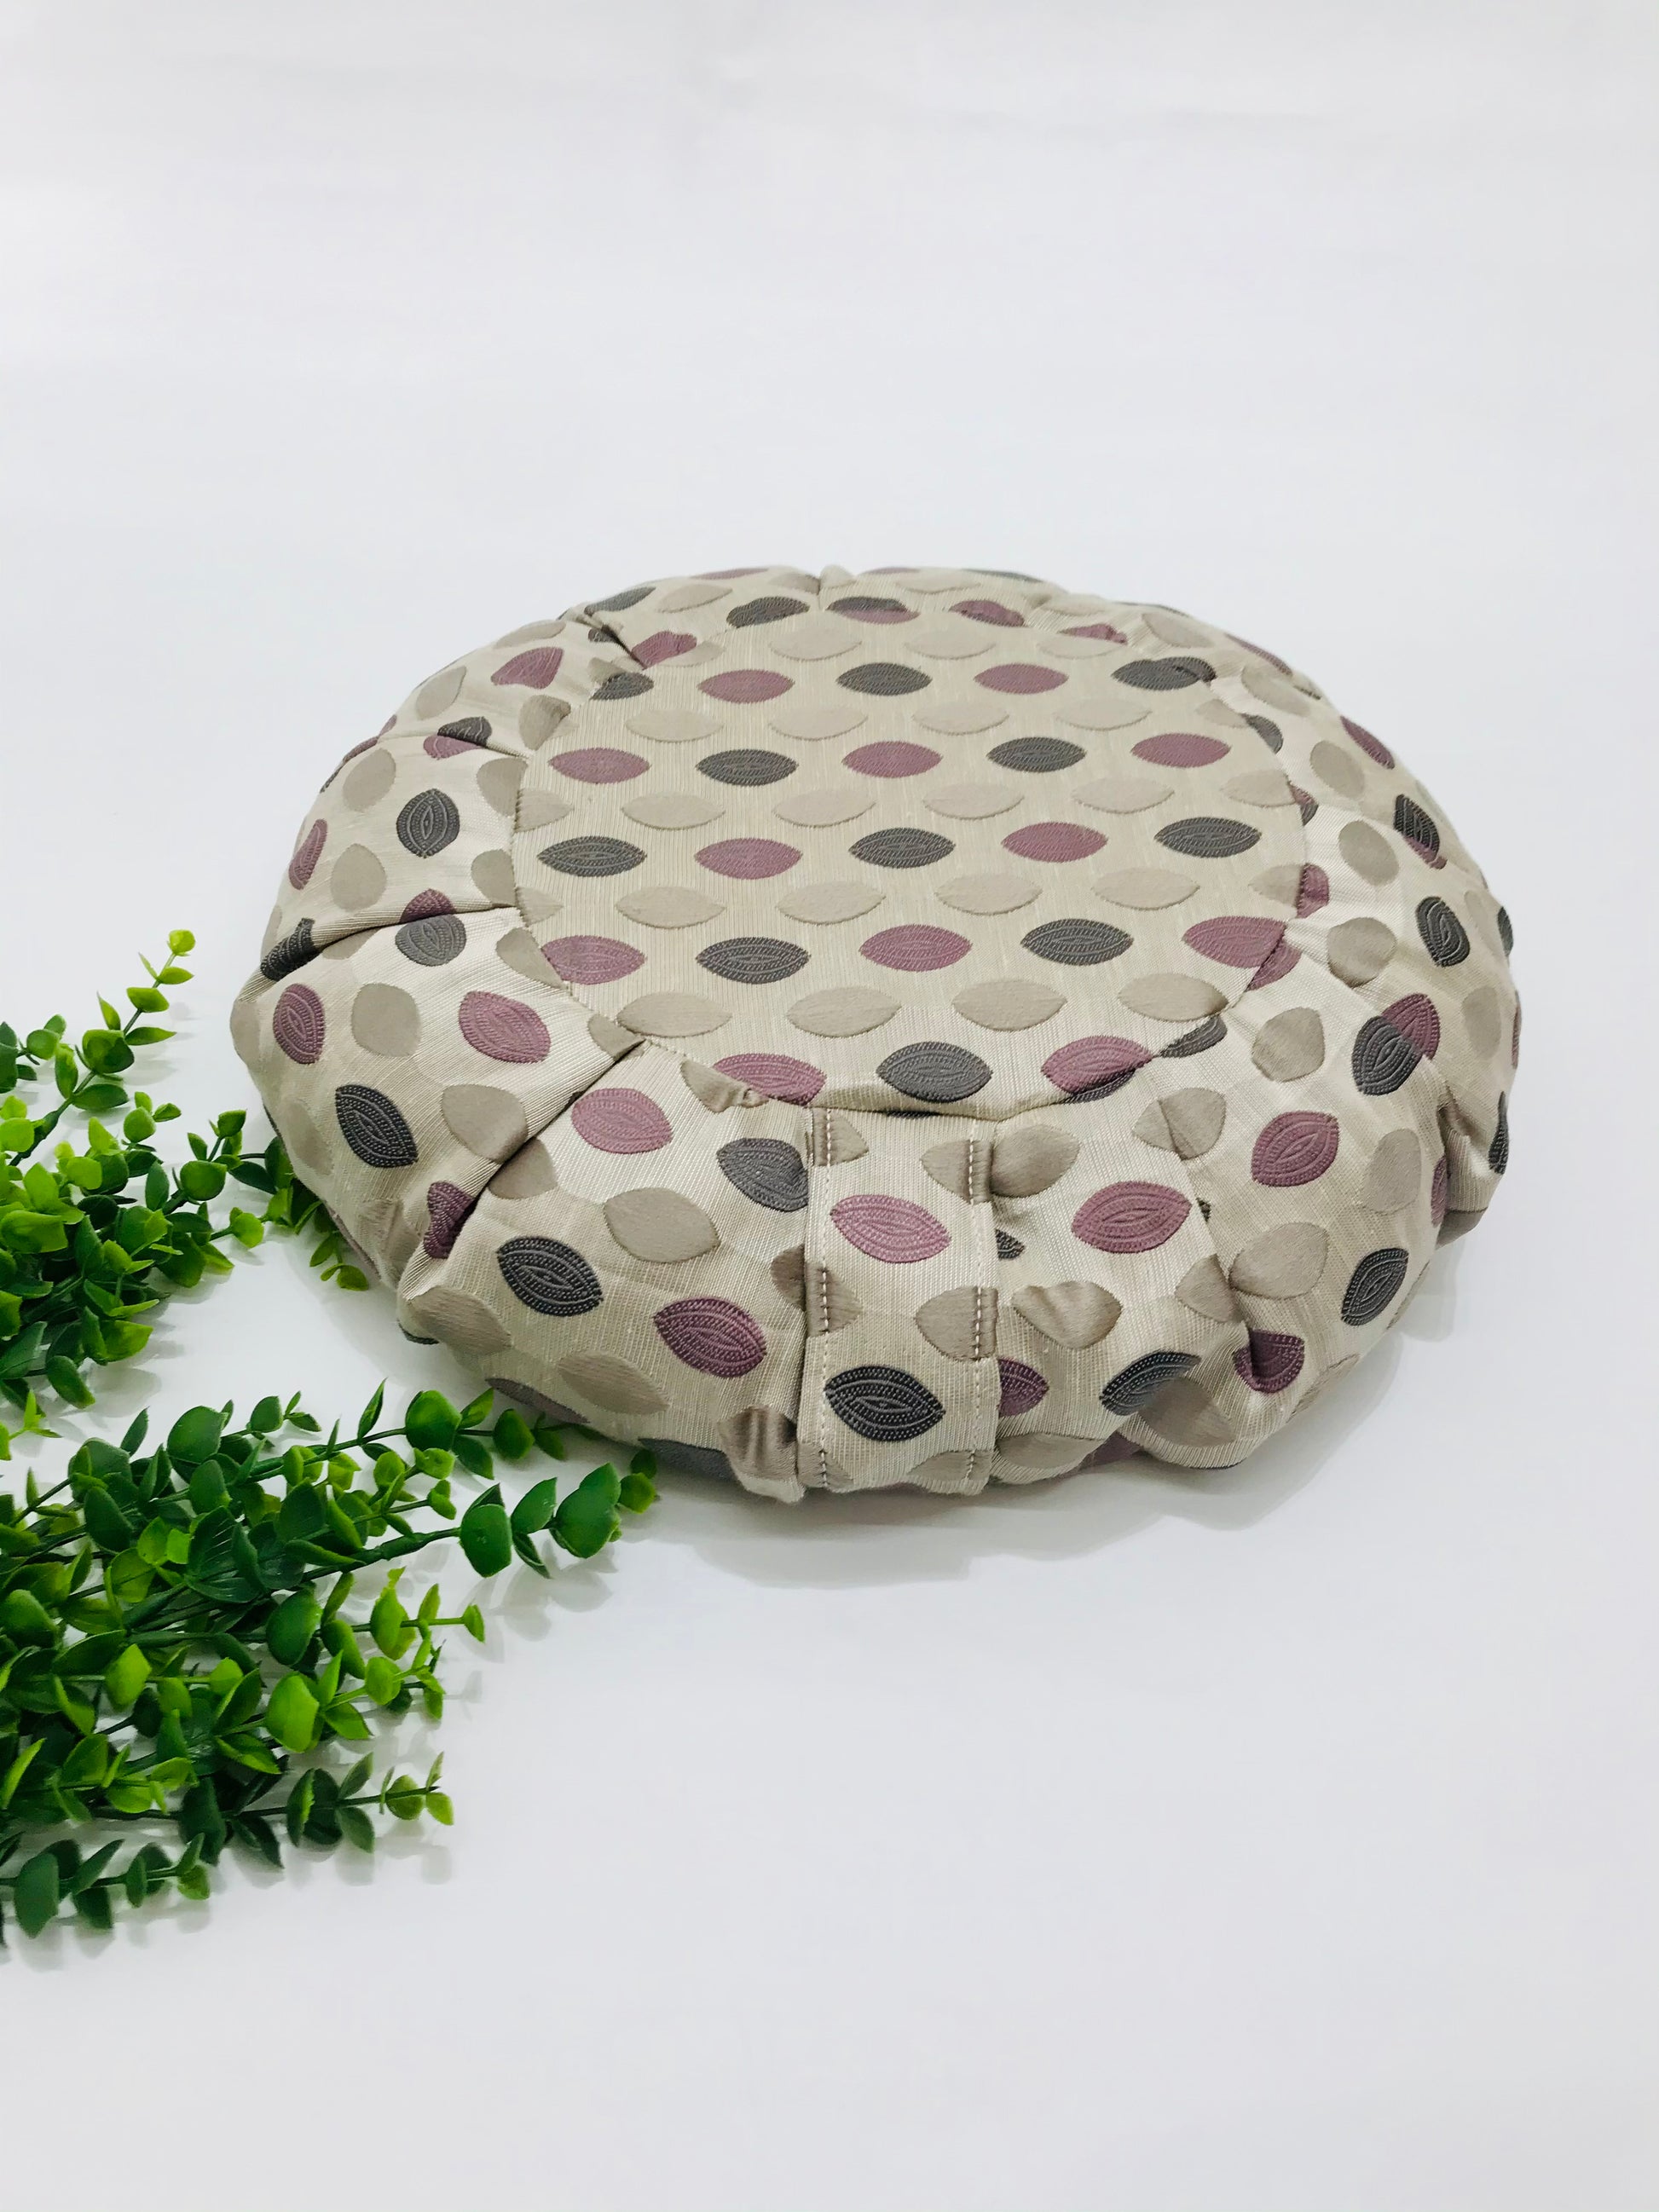 Signature Handcrafted premium home decor fabric meditation seat cushion in graphic print purple fabric. Align the spine and body in comfort to calm the monkey mind in your meditation practice. Handcrafted in Calgary, Alberta Canada